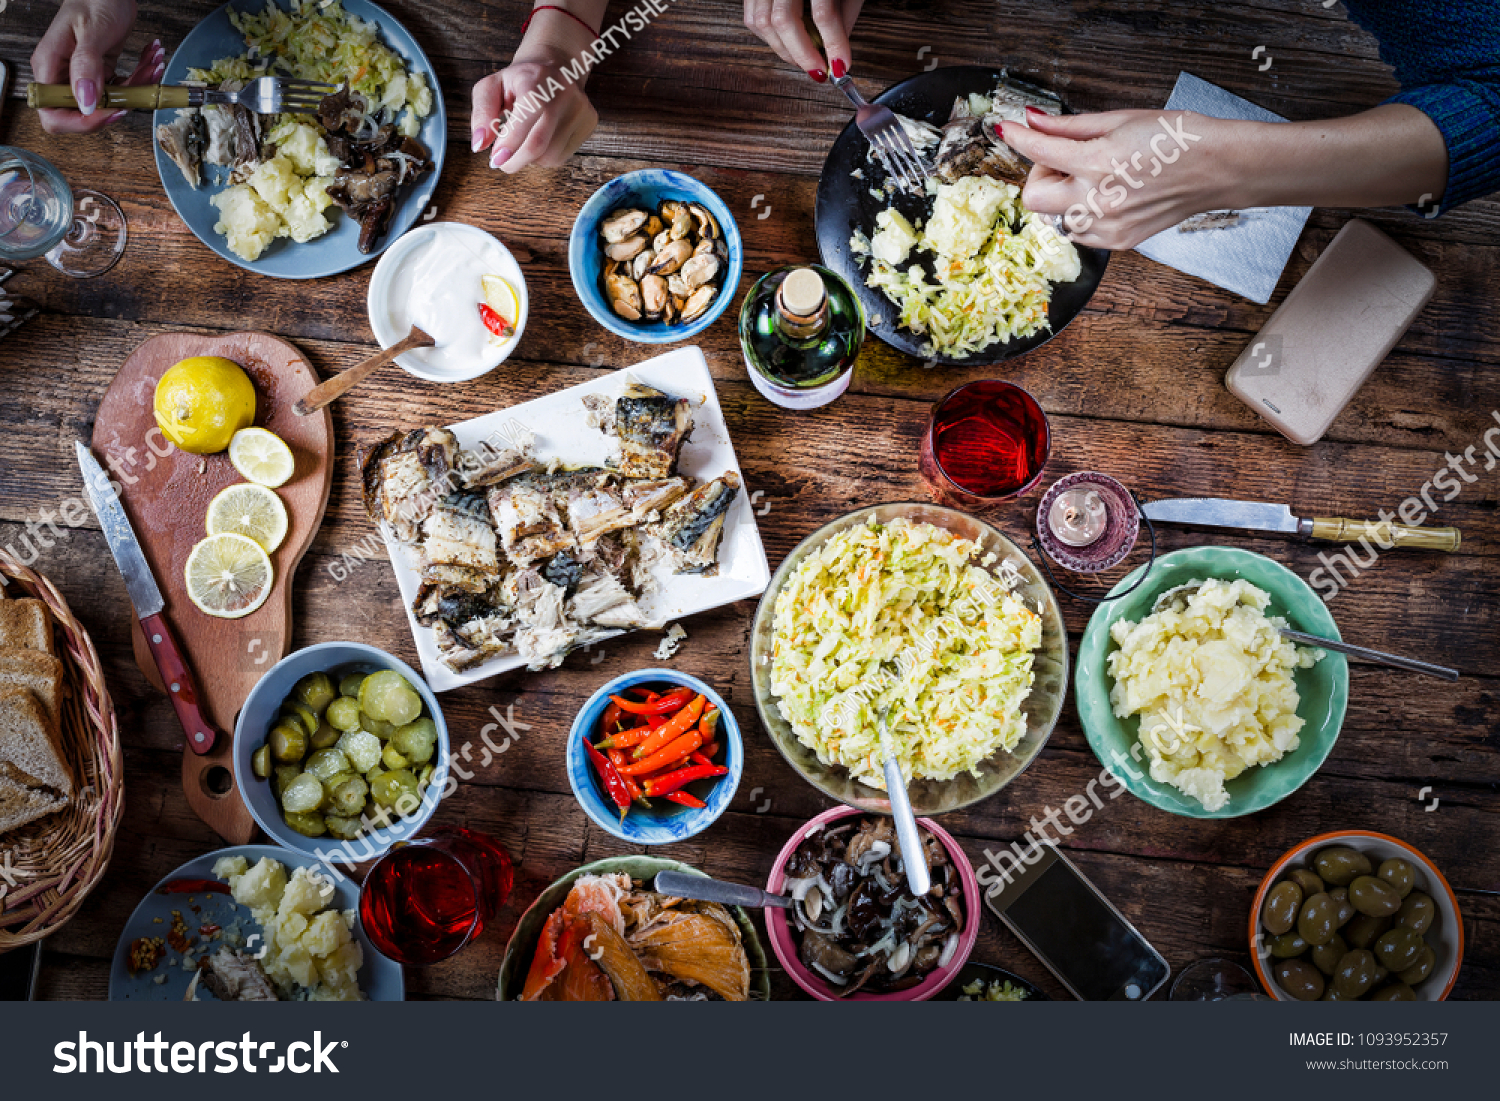 Flat-lay of friends hands eating and drinking together.Food Catering.Buffet Party Concept.having party, gathering,celebrating together at wooden rustic table set with different wine snacks. top view #1093952357